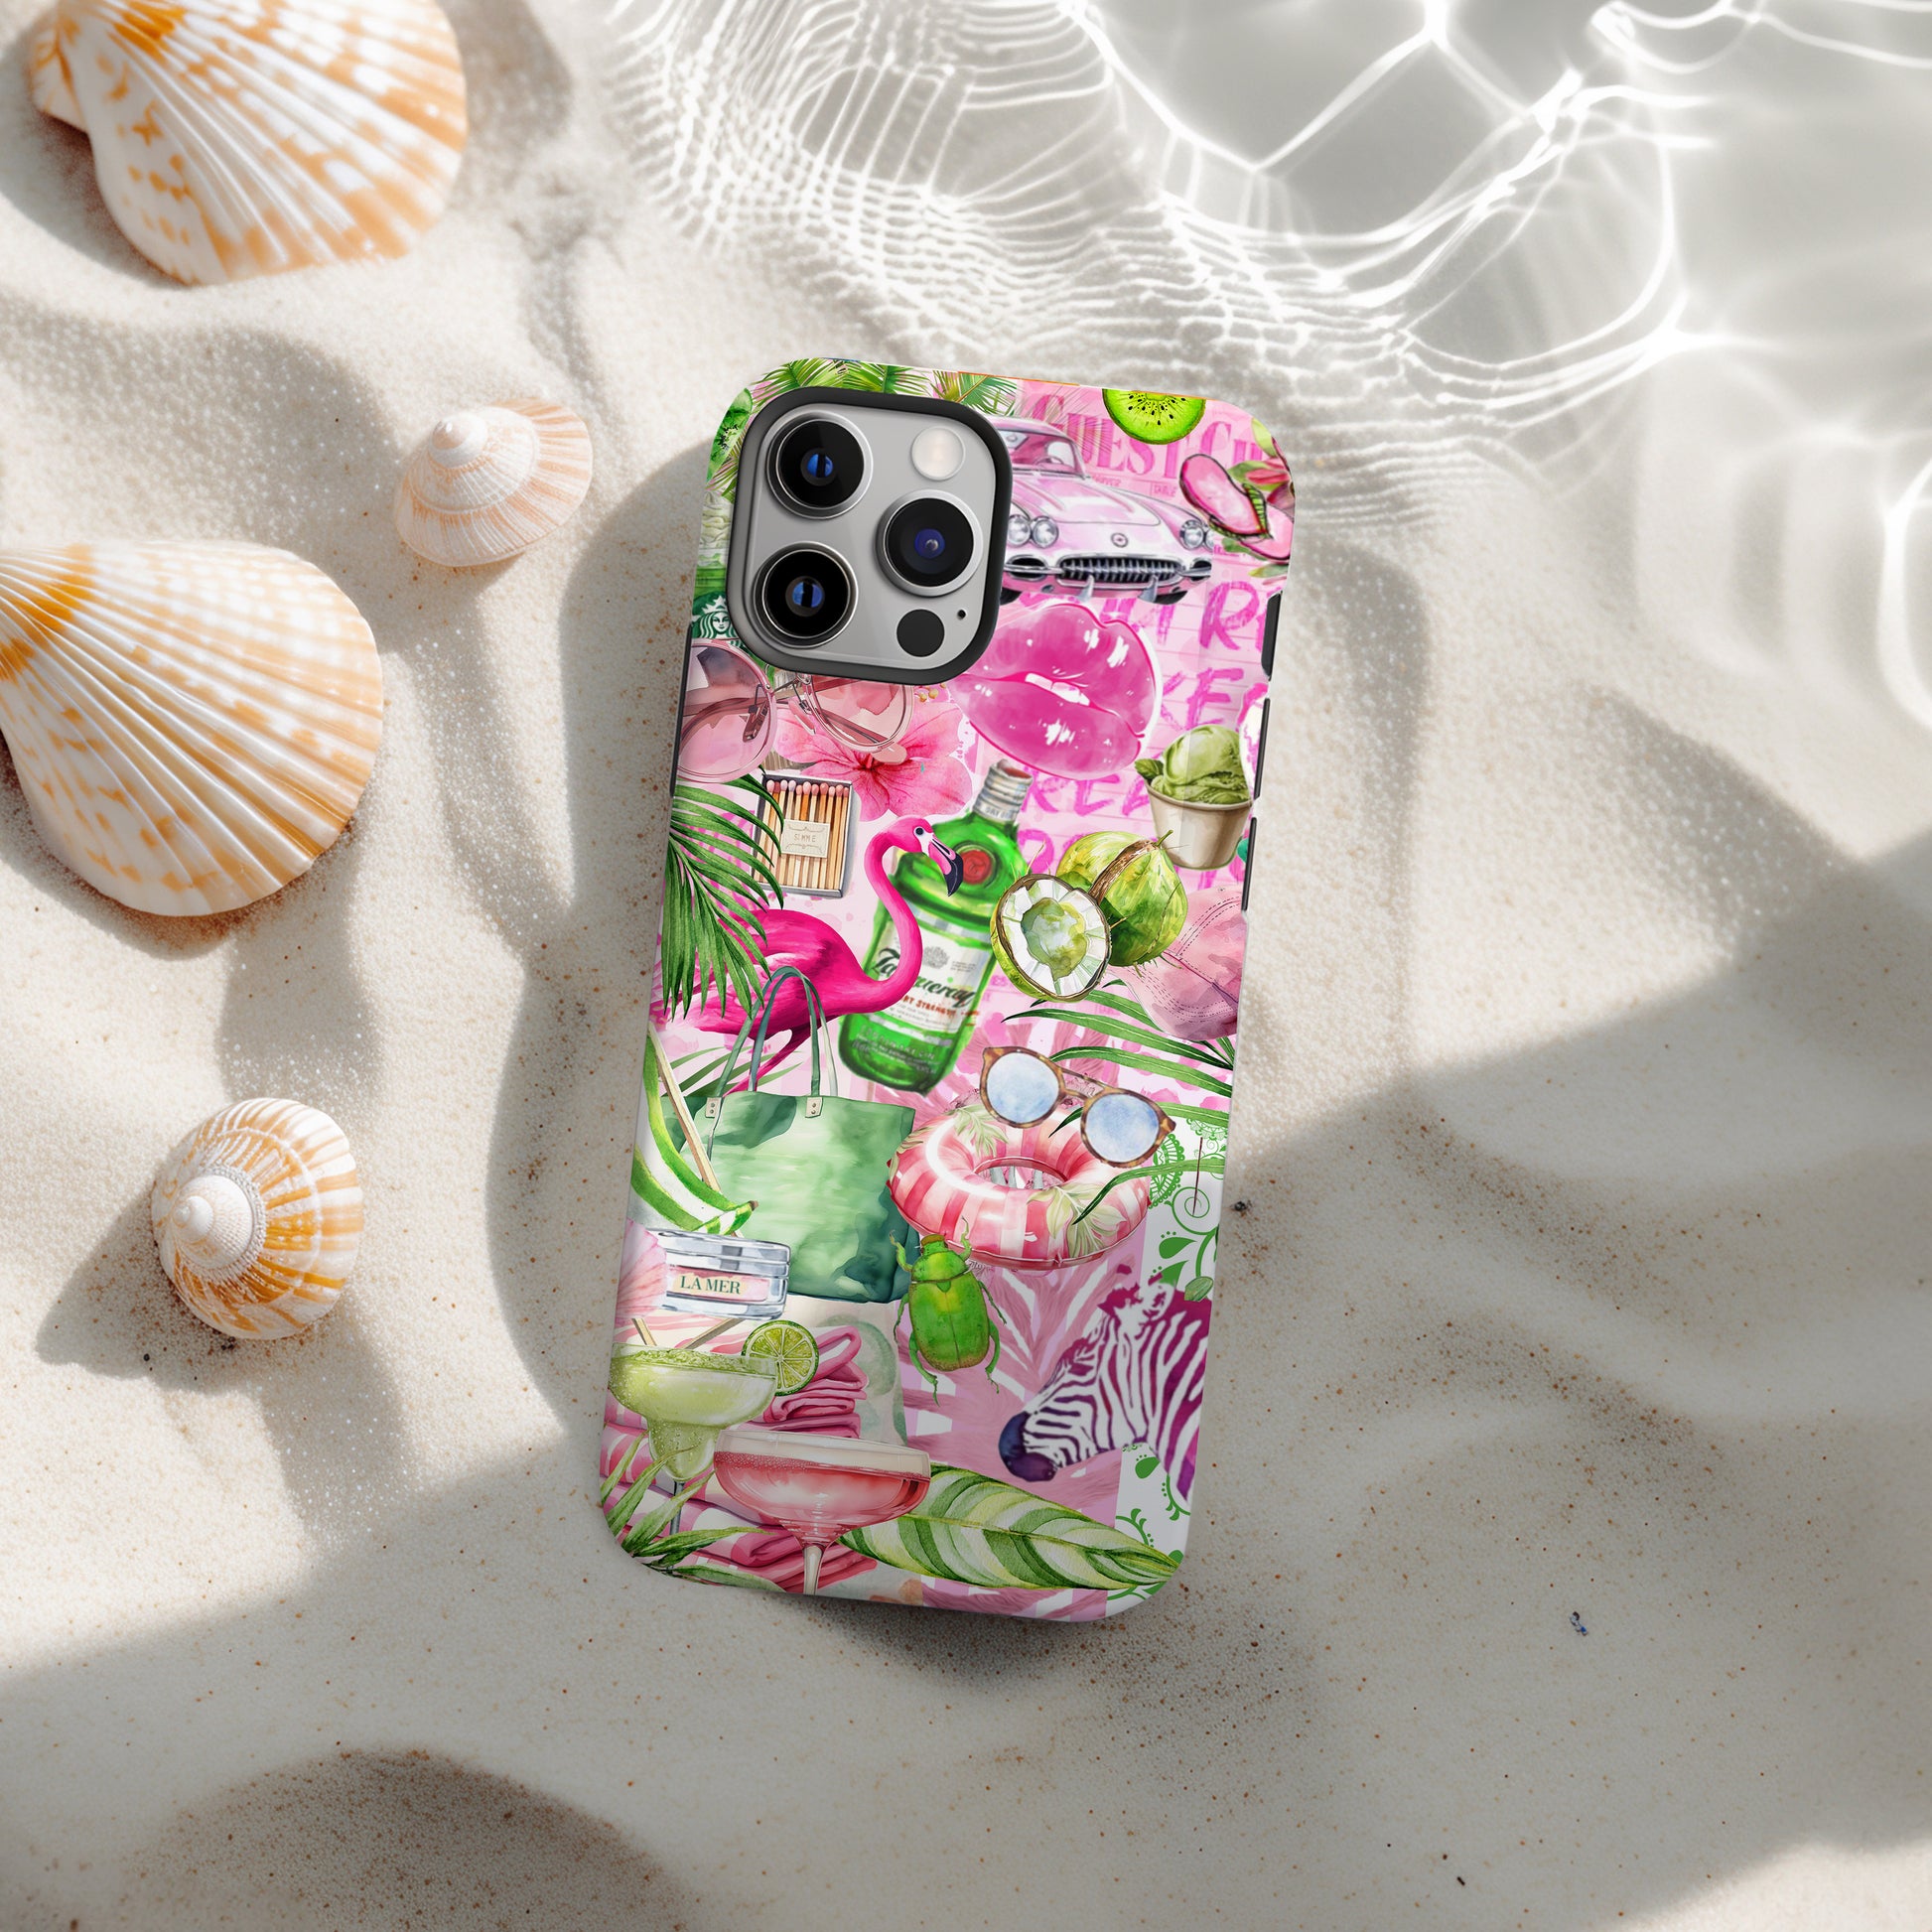 Palm Beach Collage Phone Case. Scrapbook style Maximalist preppy beach design. Pink and Green phone case for iPhone and Samsung Galaxy. Image shows phone case on the beach